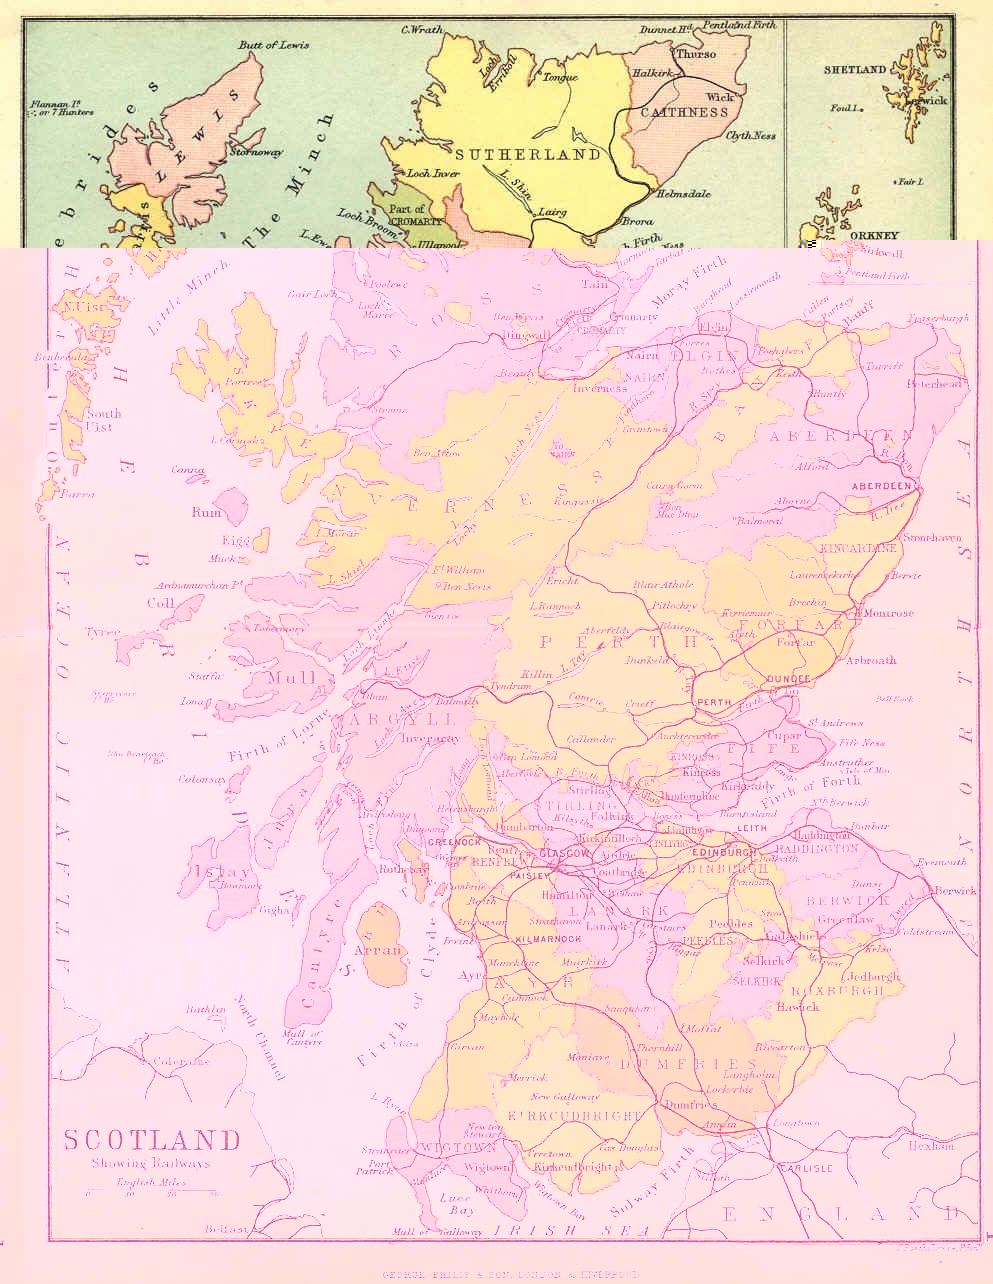 Bartholomews Map of Scotland showing county boundaries , towns and railway lines about 1890